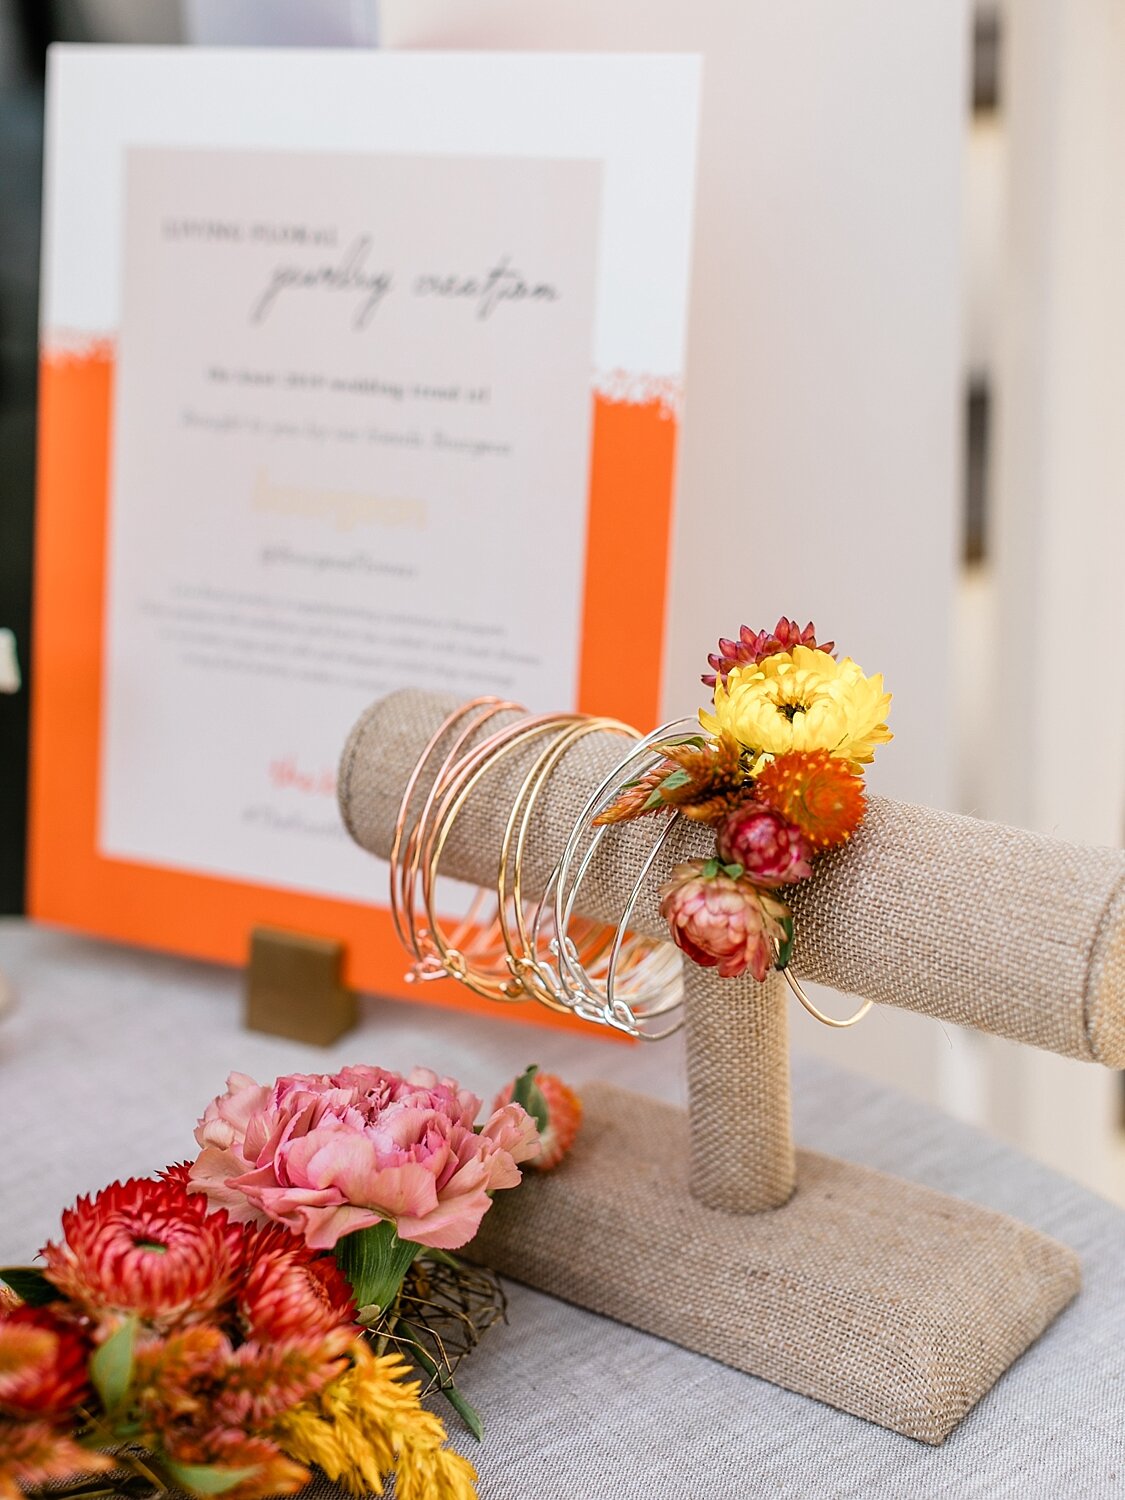 Bourgeon Flowers living jewelry at the Knot event